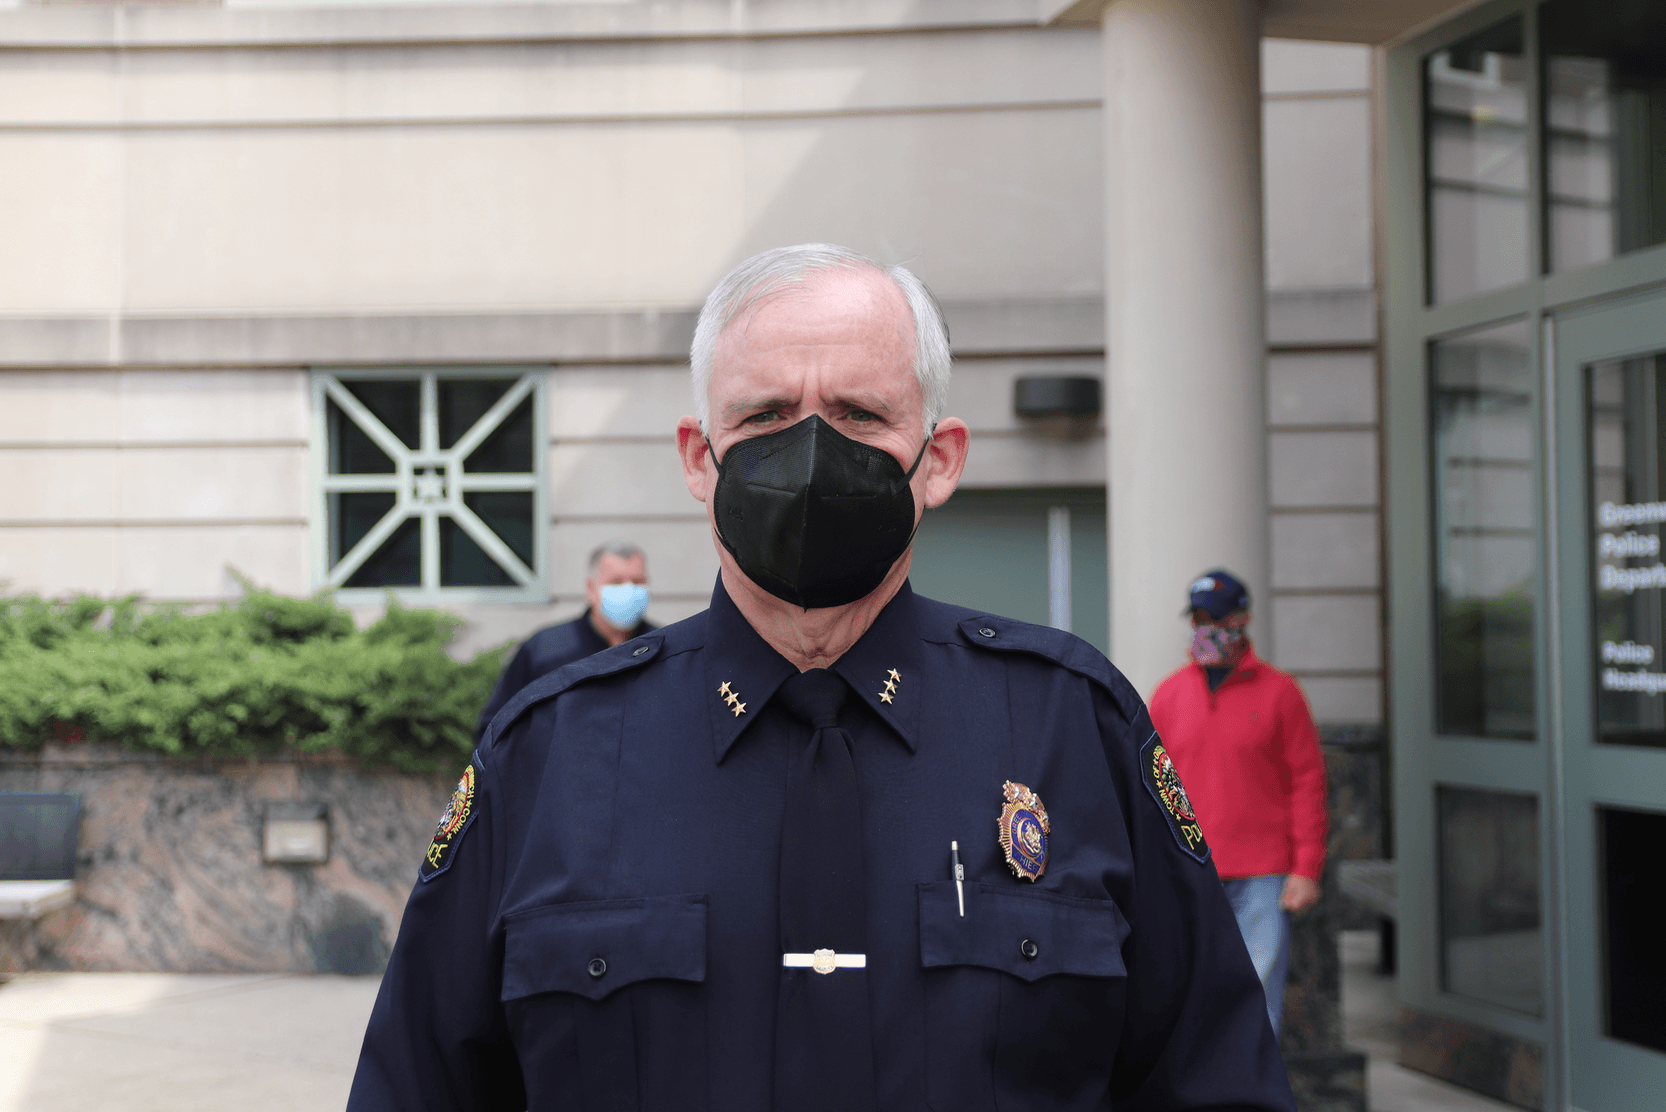 Greenwich Police Chief James Heavey outside the public safety complex. April 14, 2020 Photo: Leslie Yager